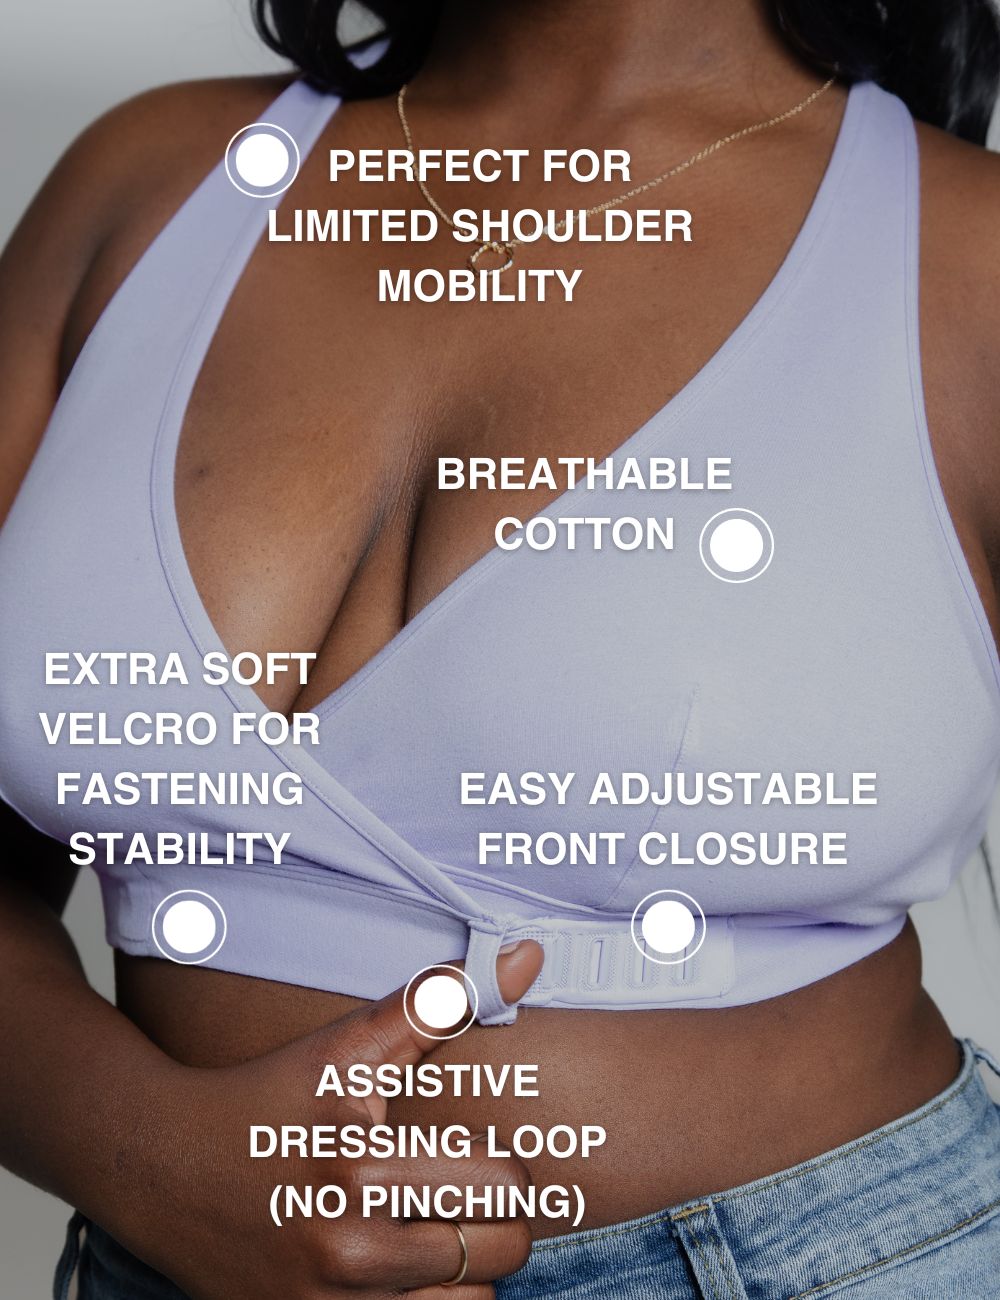 Perfect for limited shoulder mobility. BREATHABLE COTTON. EXTRA soft Velcro for fastening stability. Easy adjustable front closure. ASSISTIVE DRESSING LOOP (NO PINCHING)